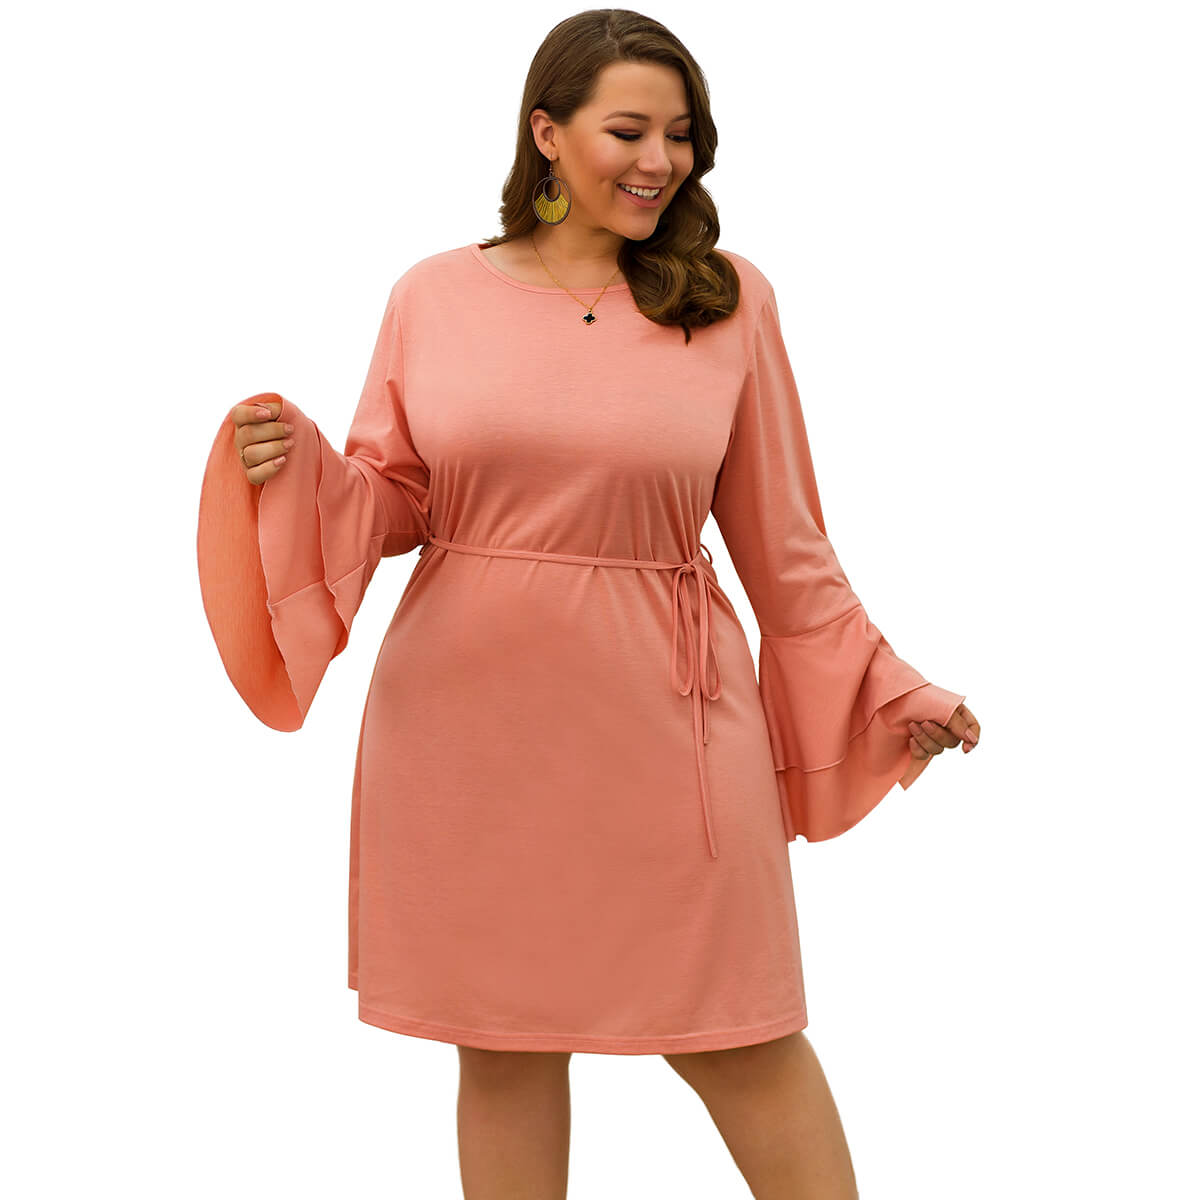 red bell sleeve dress plus size